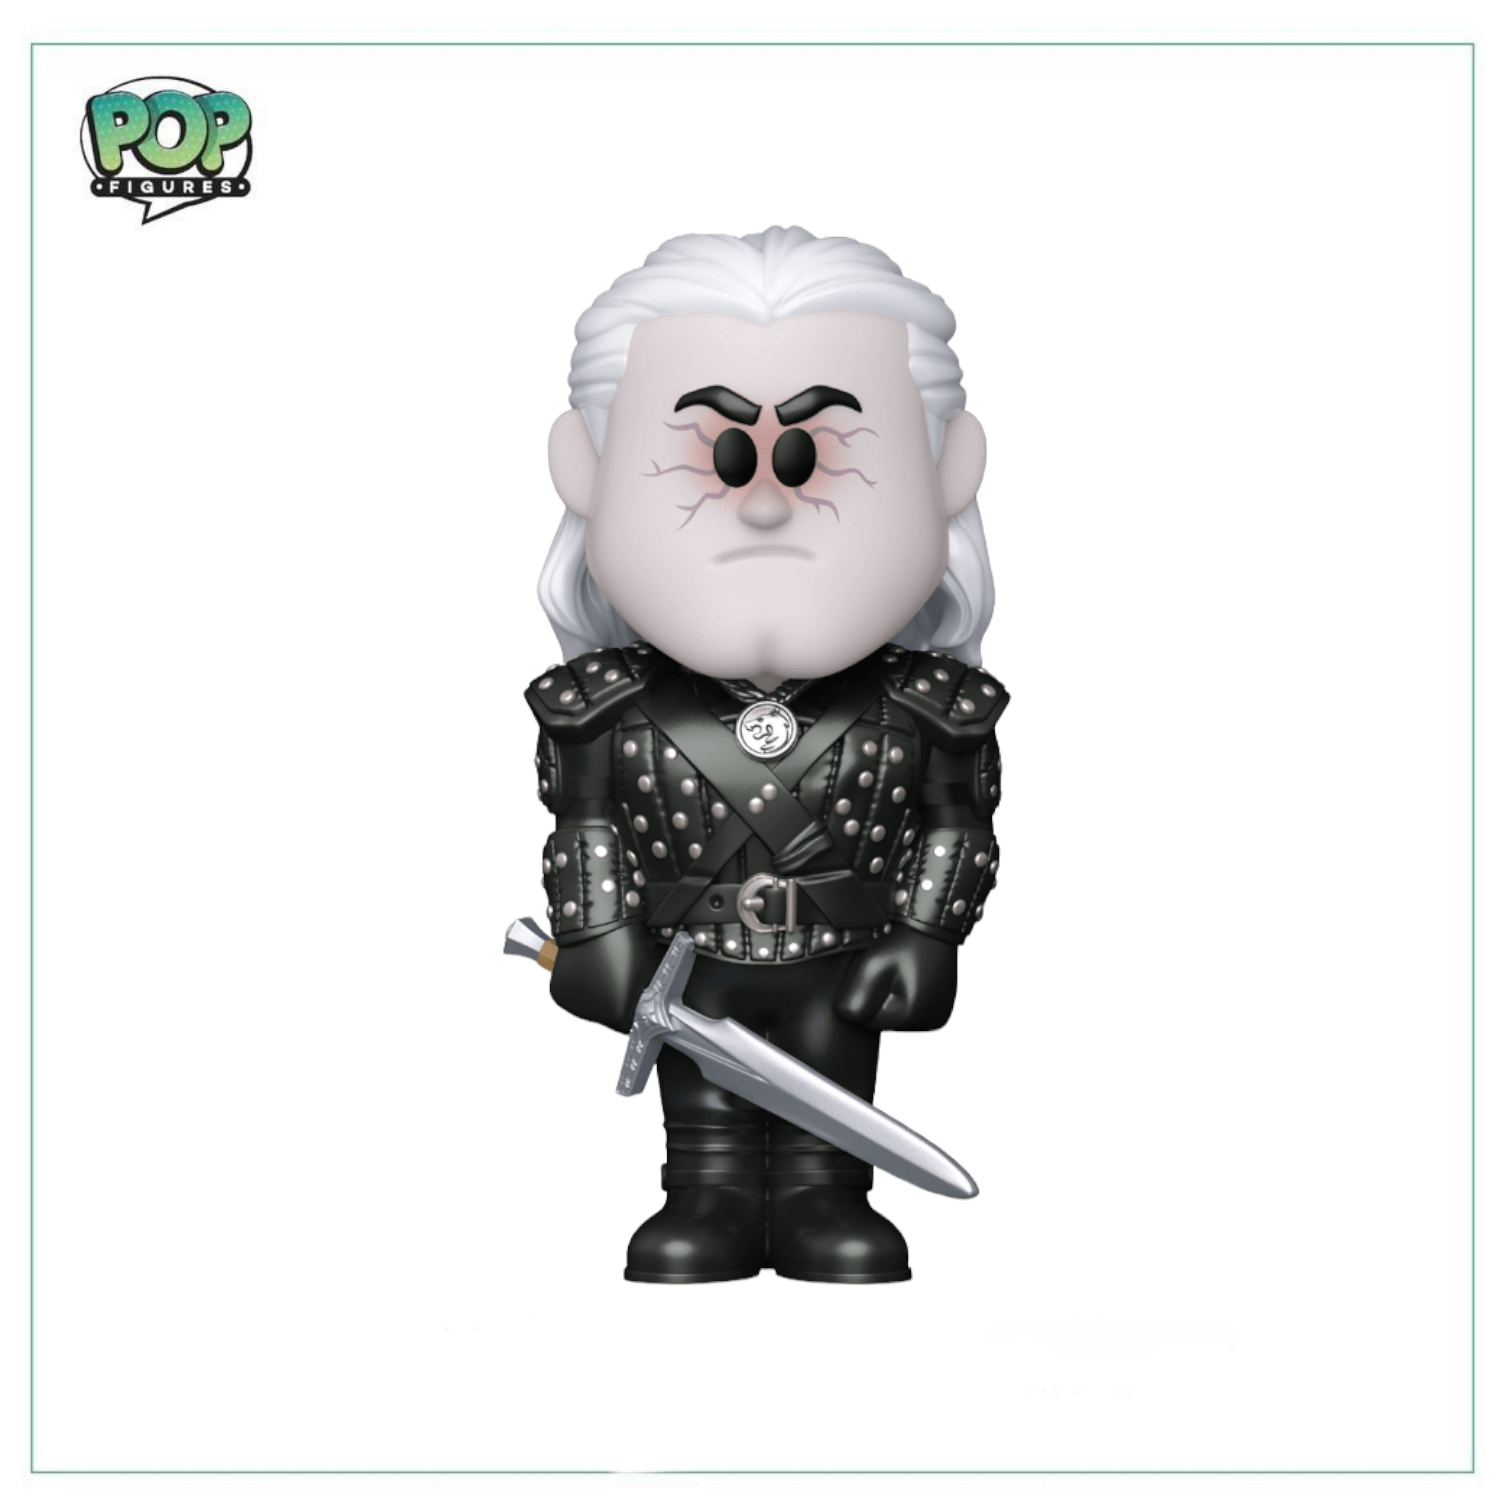 Geralt Funko Soda Vinyl Figure! - The Witcher - LE10000 Pcs - Chance Of Chase